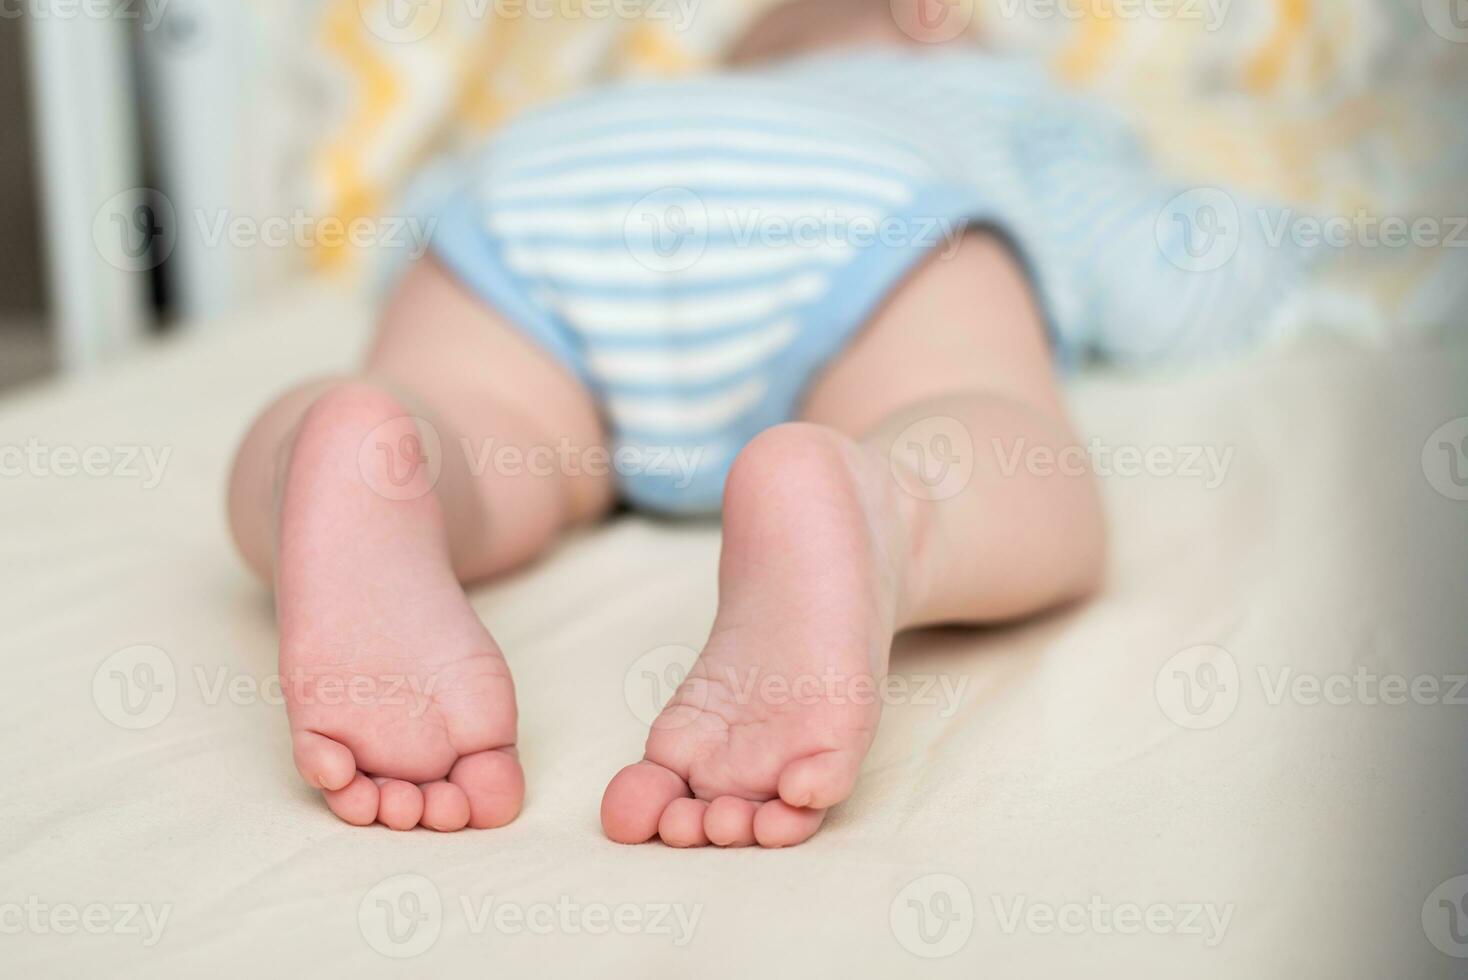 Legs of a sleeping baby in the crib. Child's foot. photo